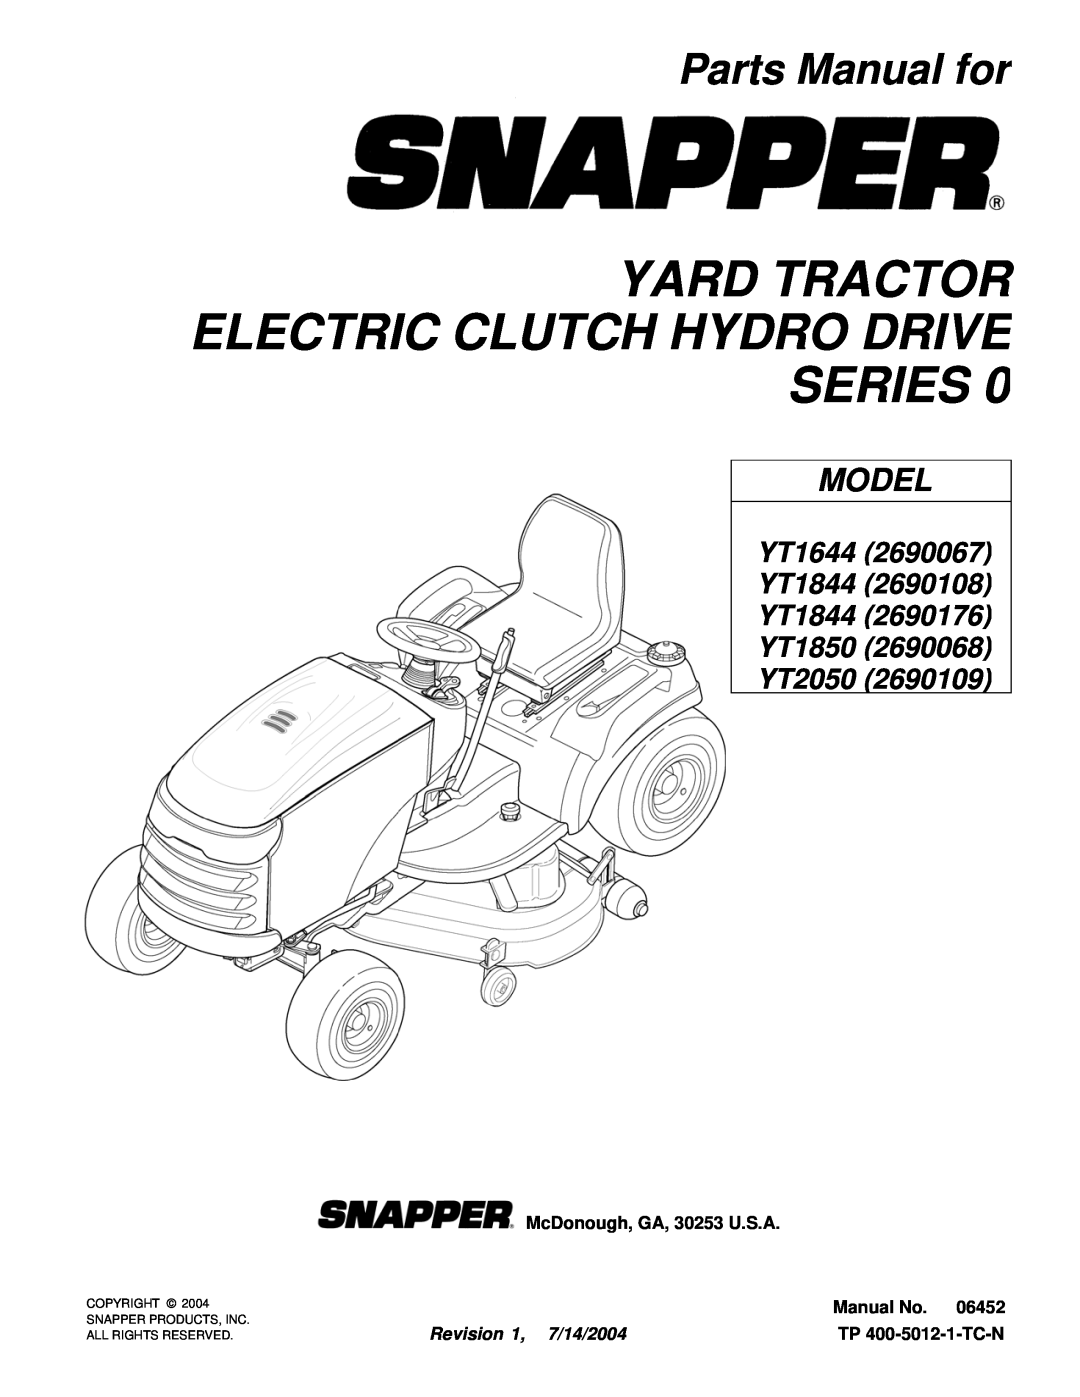 Snapper YT1644, YT1844, YT1844, YT1850, YT2050 manual Yard Tractor Electric Clutch Hydro Drive Series, Parts Manual for 